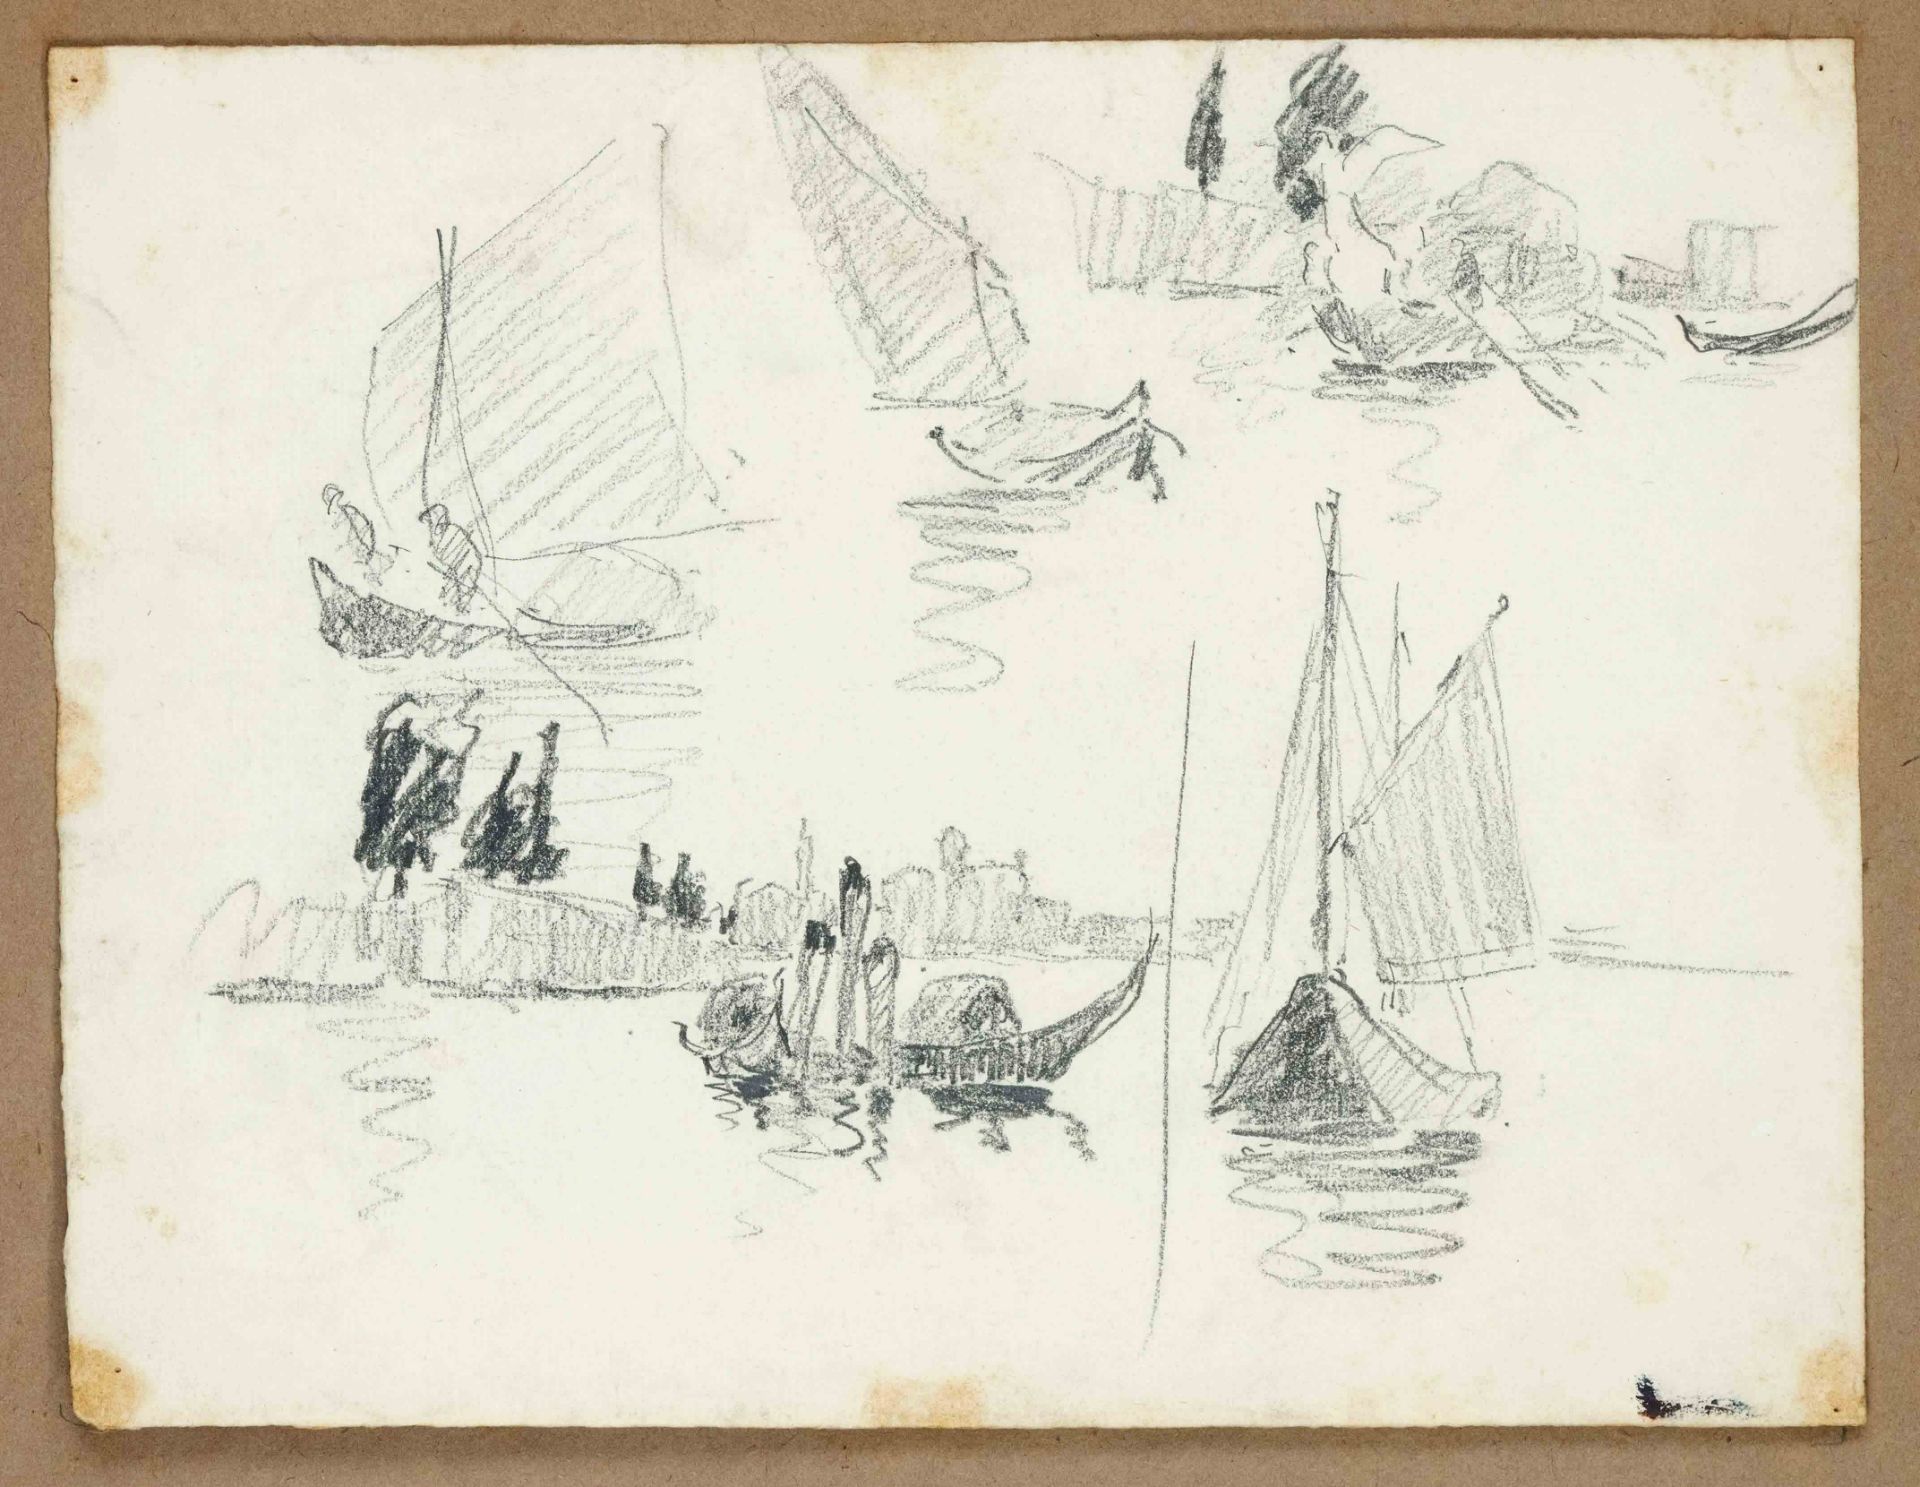 Hans Seydel (1866-1916), 10 drawings by the German architectural and landscape painter from Karschau - Image 2 of 3